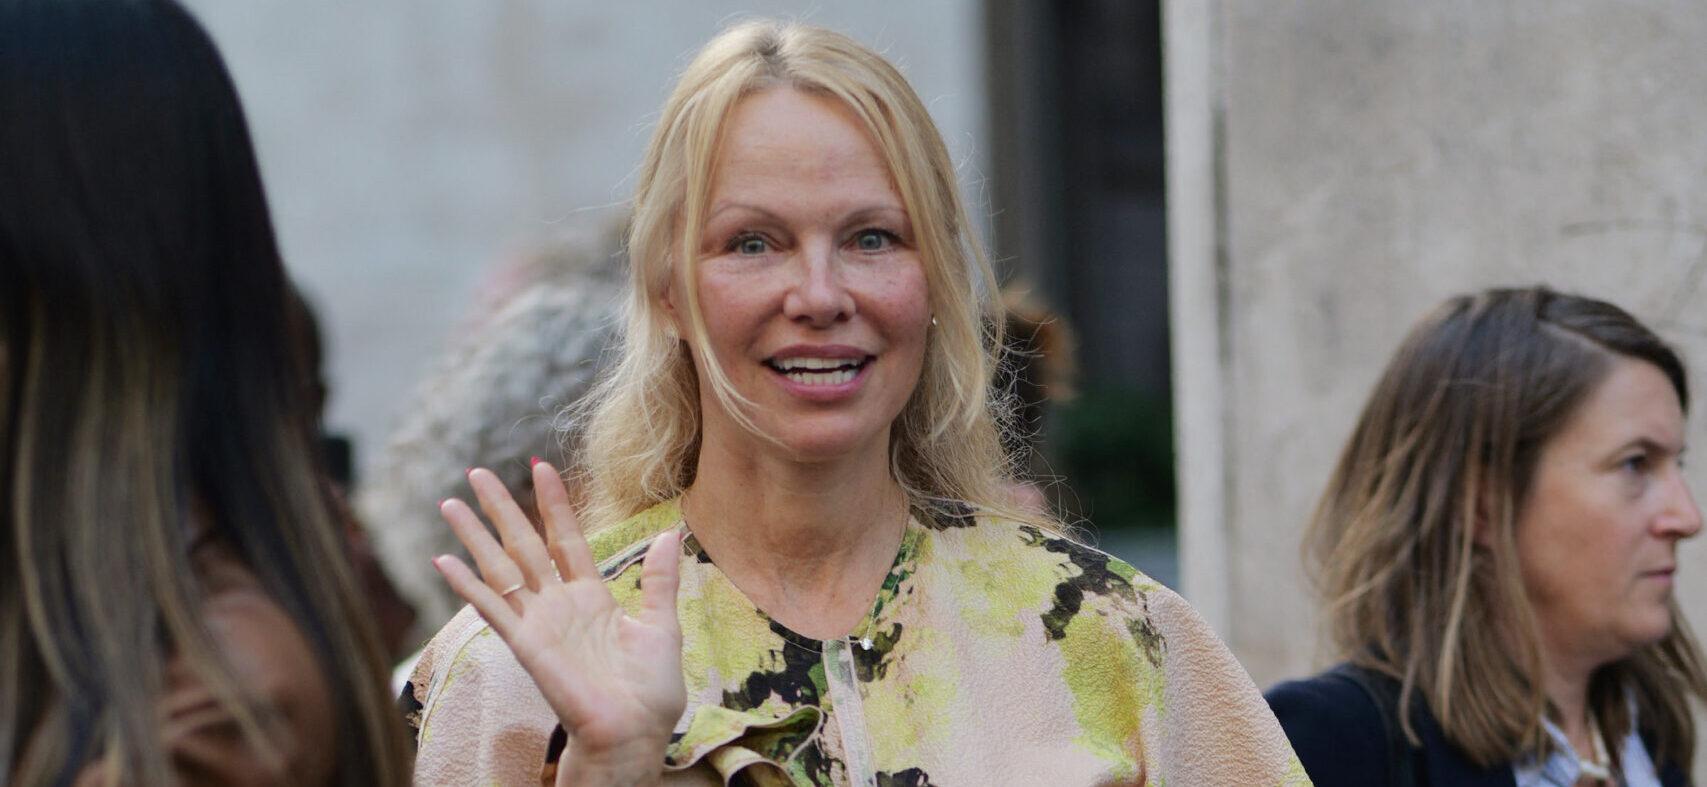 The Sad Reason Behind Pamela Anderson's Decision To Go Makeup-Free